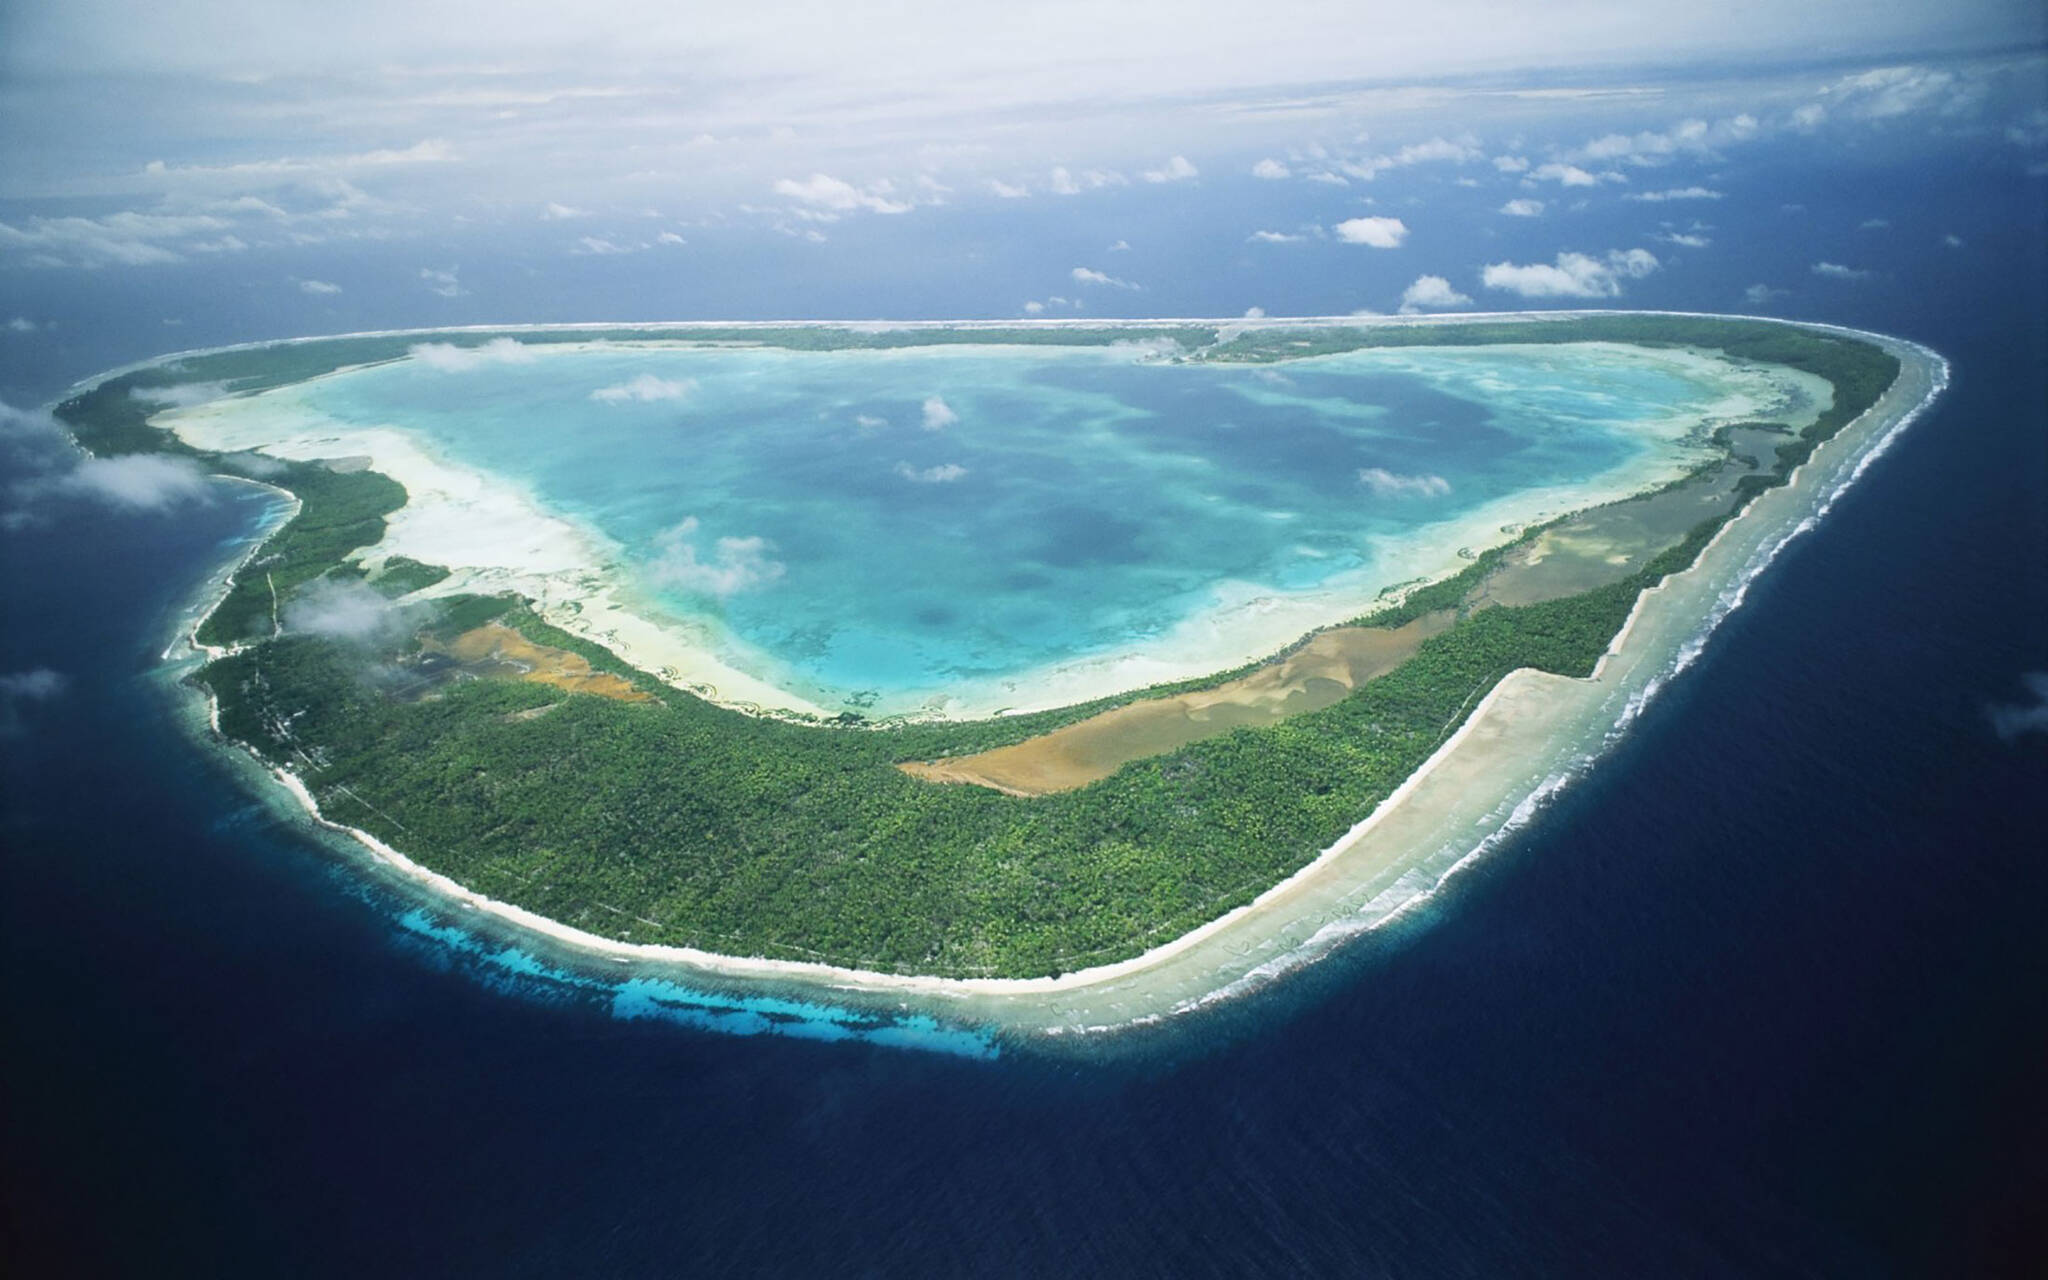 Aerial view of the Aldabra atoll in the Seychelles archipelago